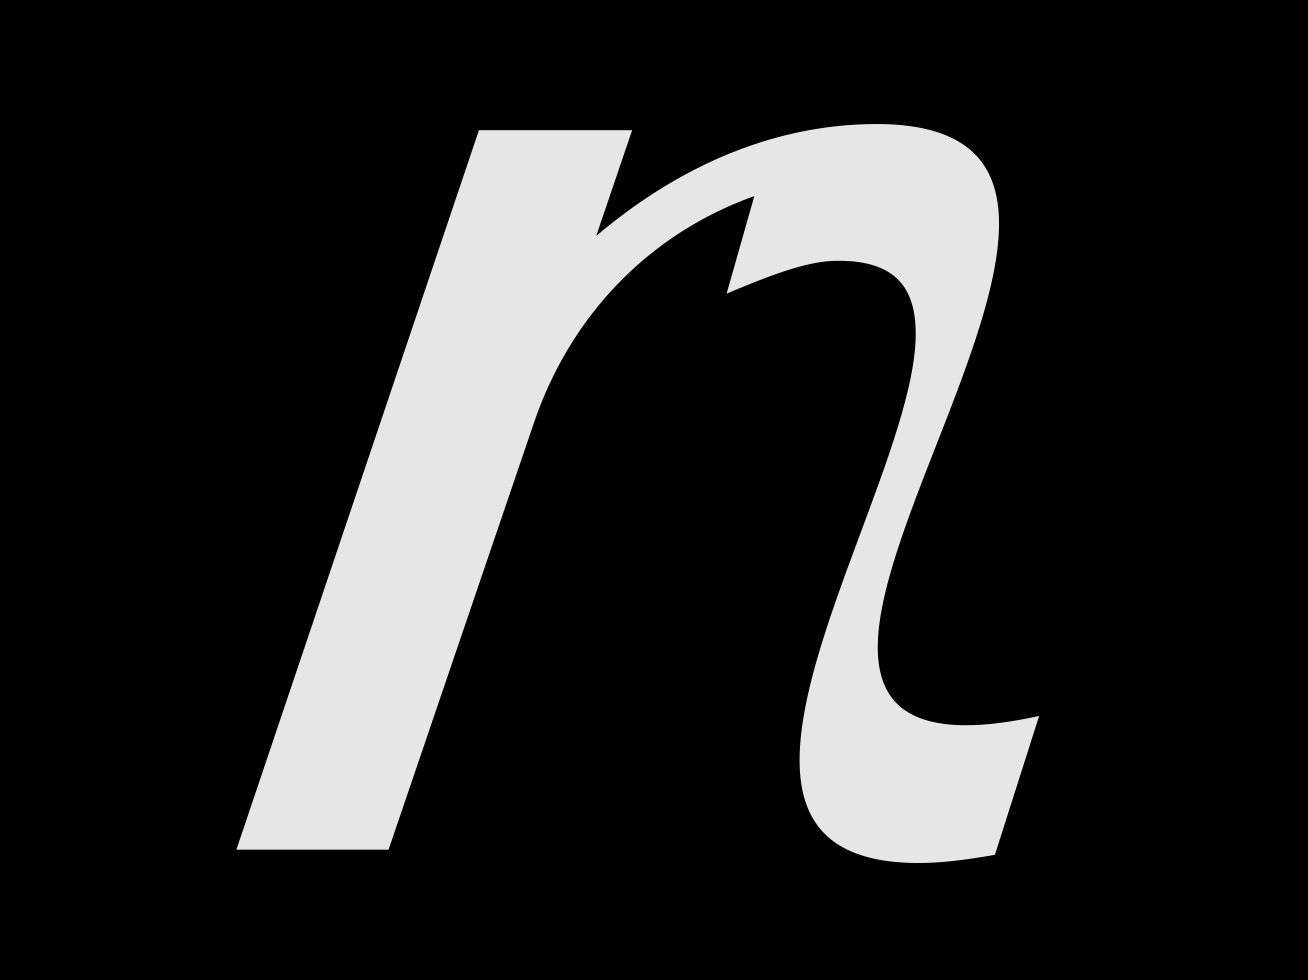 lowercase letter n on black background by Nick on Dribbble